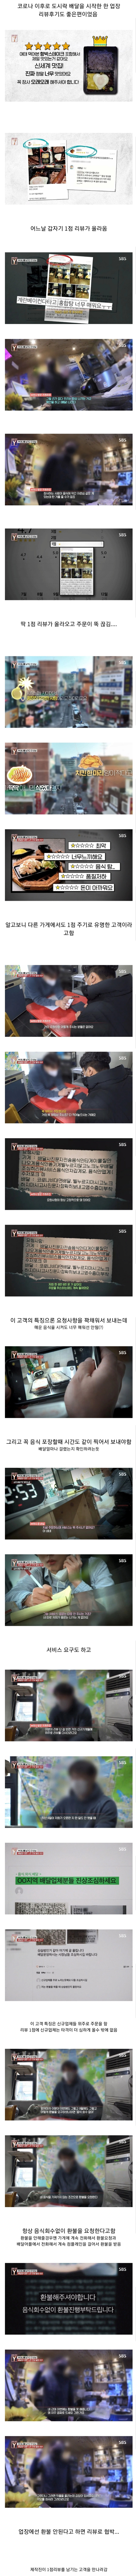 Baemin's score, 1 point. Curious story about the terrorist. Y.